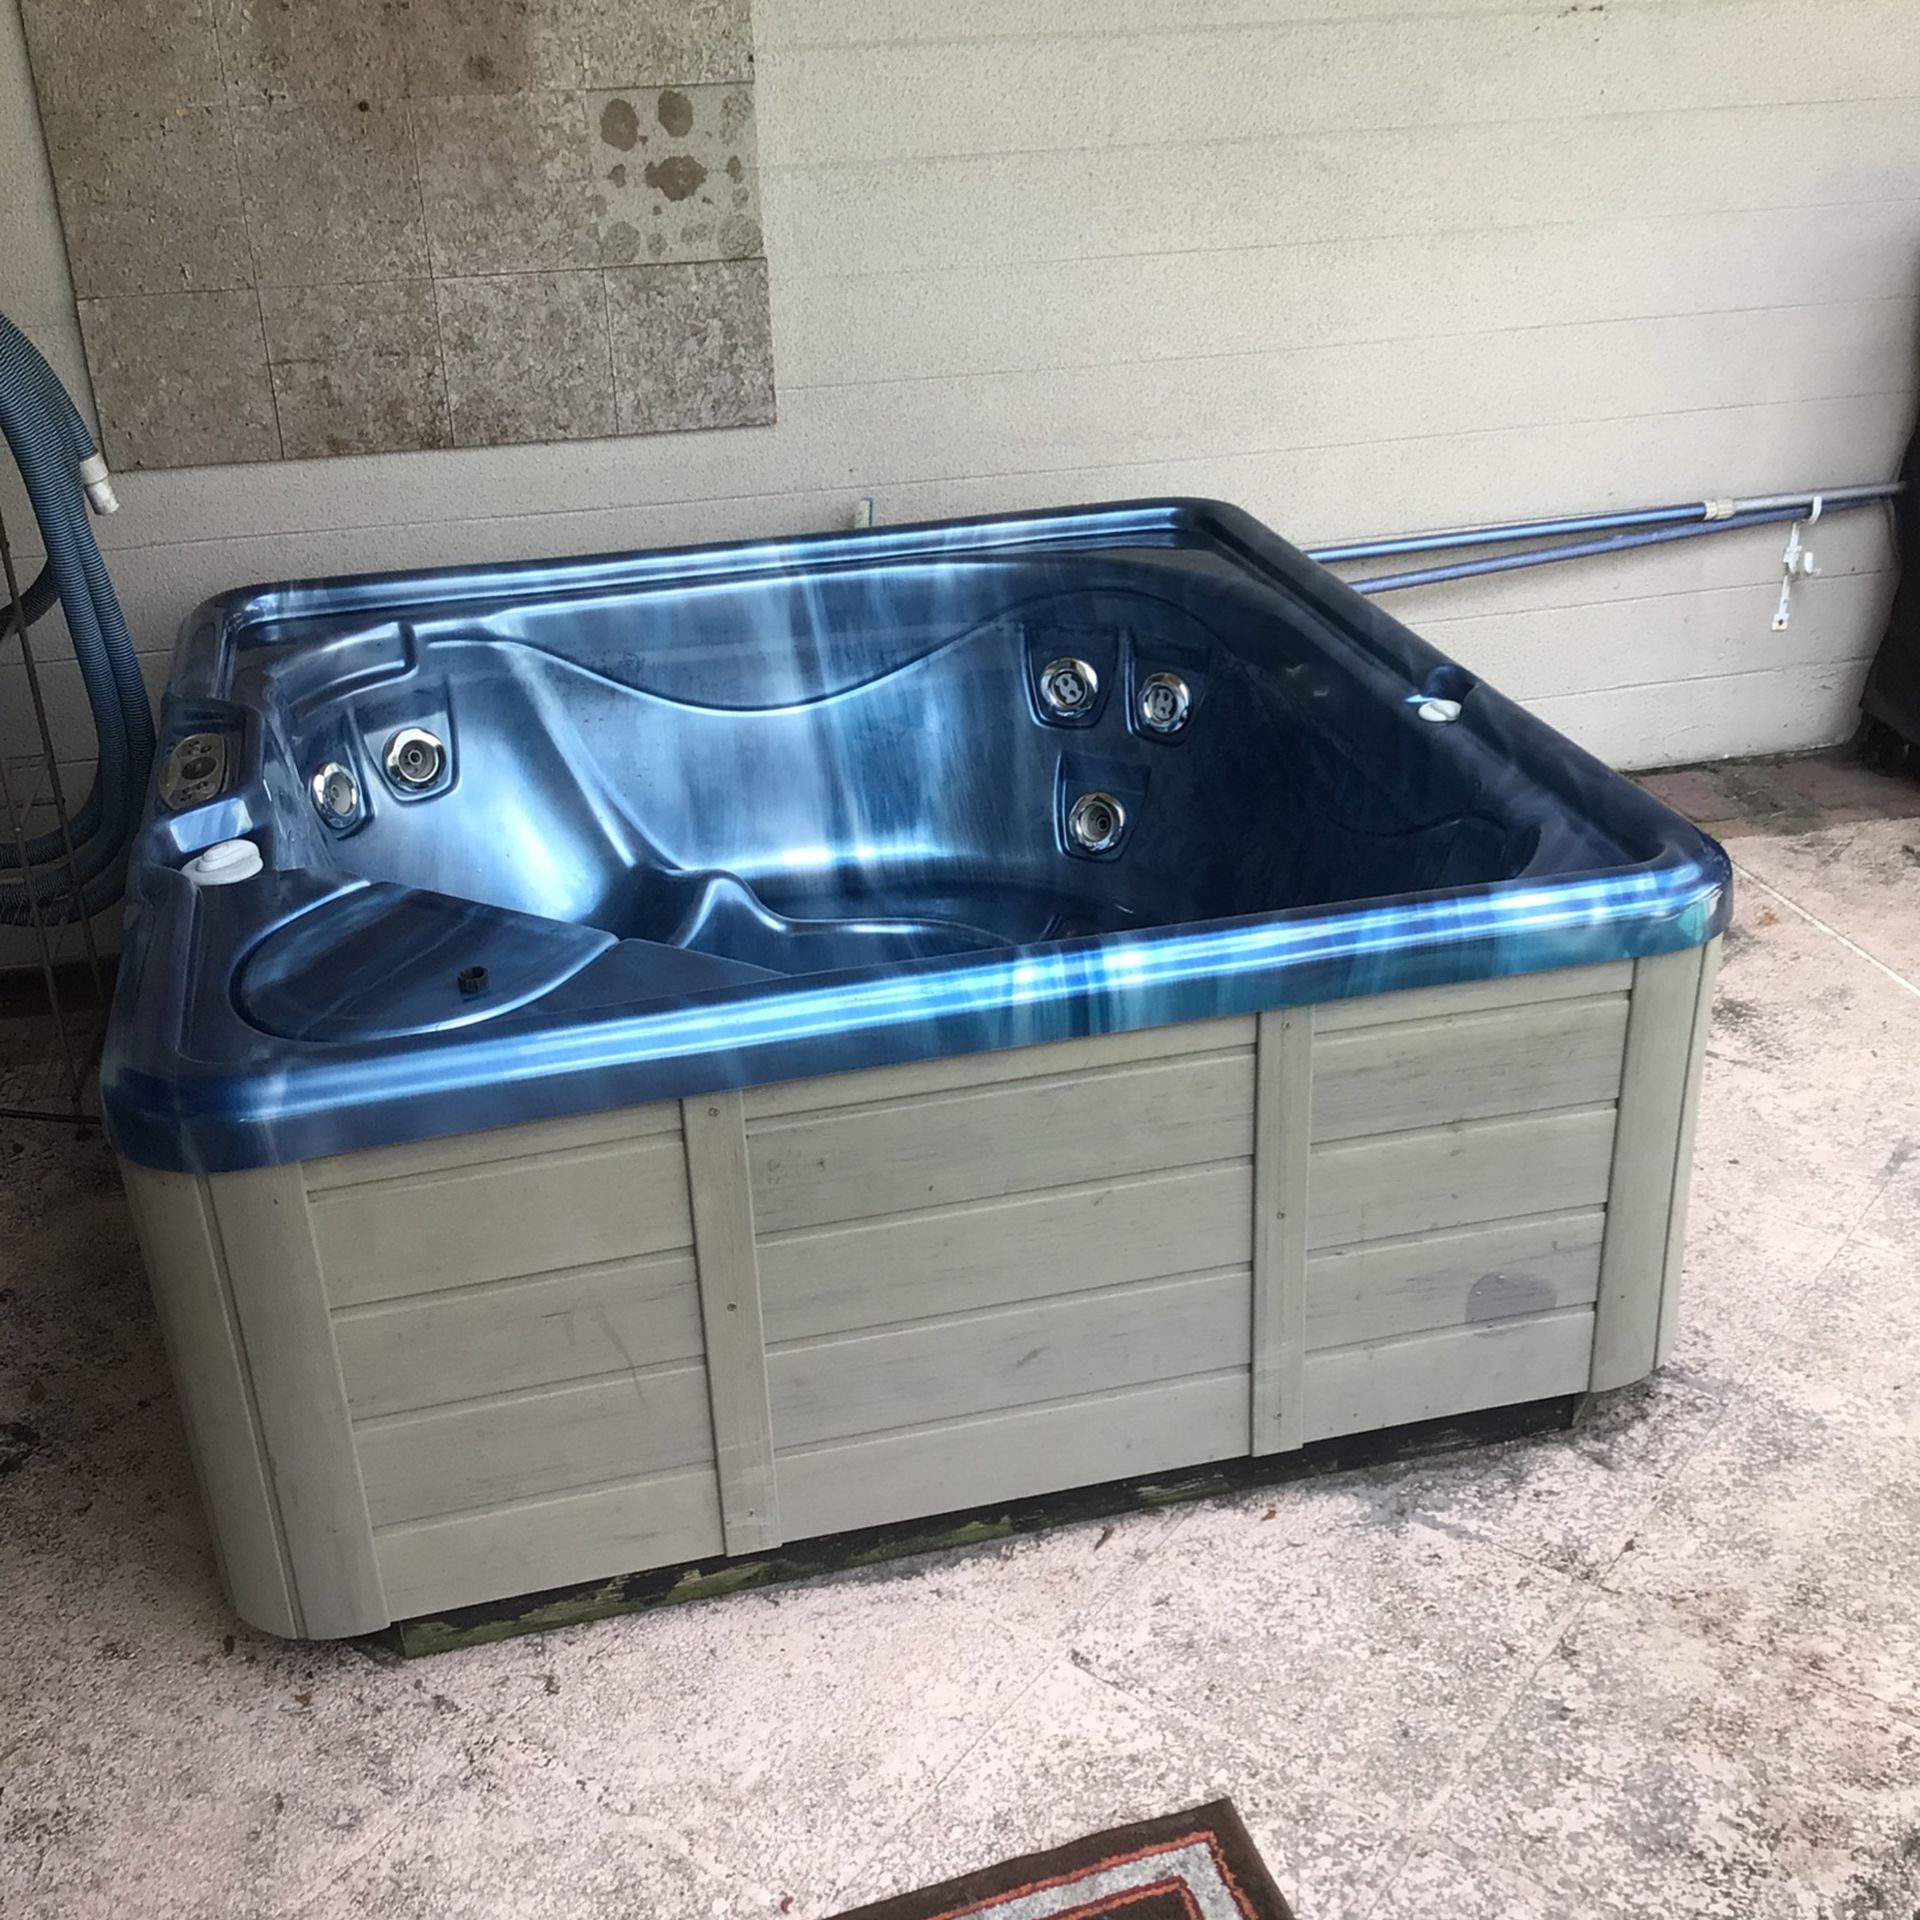 Hot Tub - MOVING - Priced To Sell  $500  - YOU HAVE TO HAUL IT